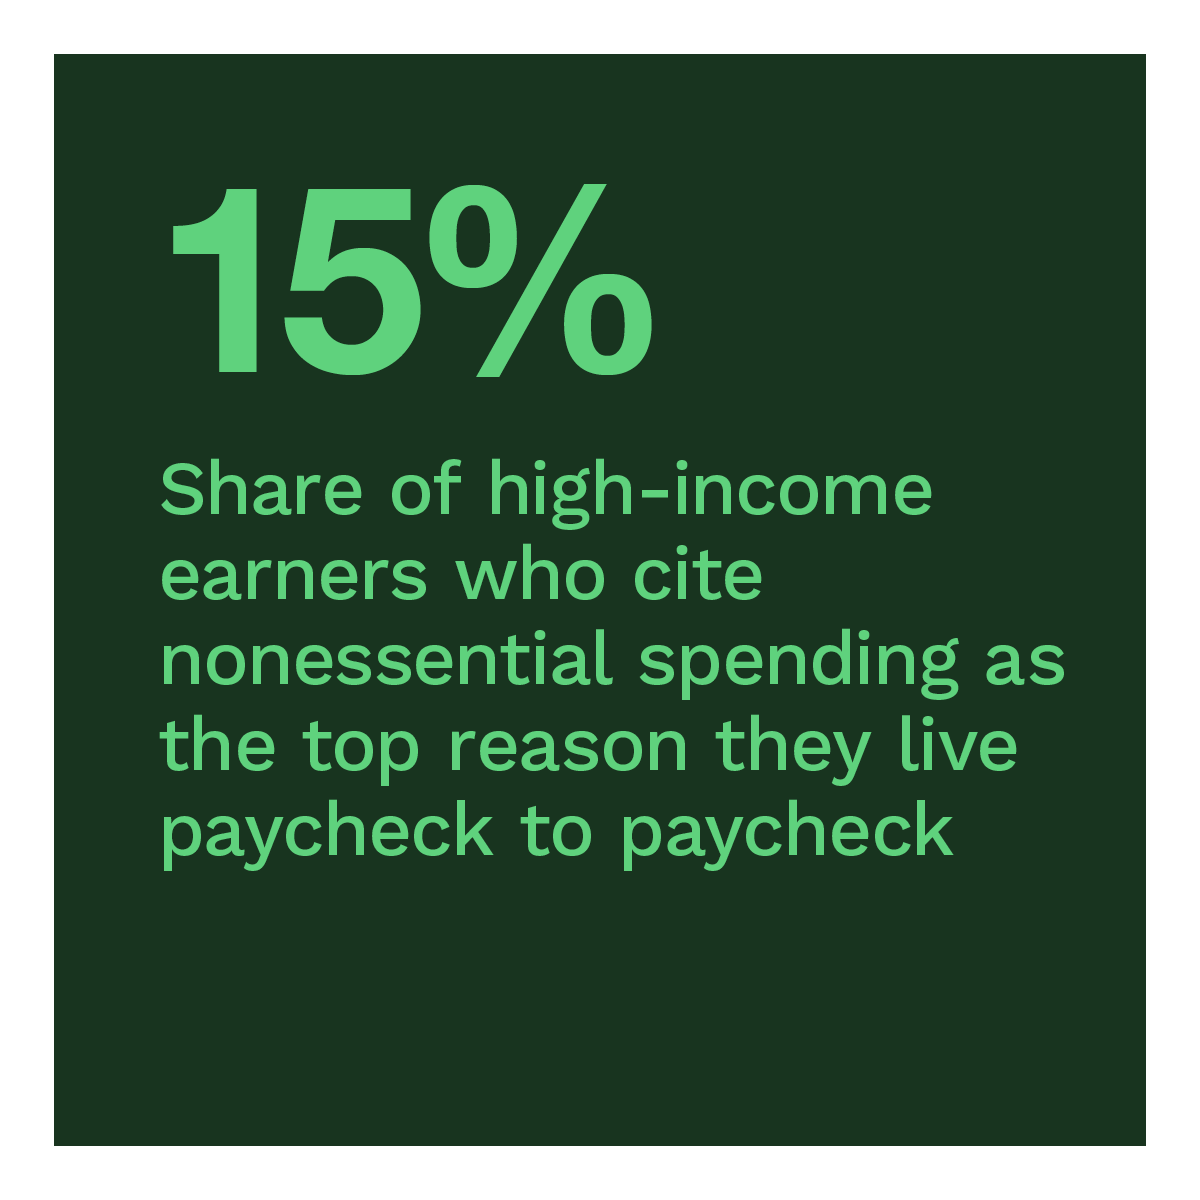  Share of high-income earners who cite nonessential spending as the top reason they live paycheck to paycheck